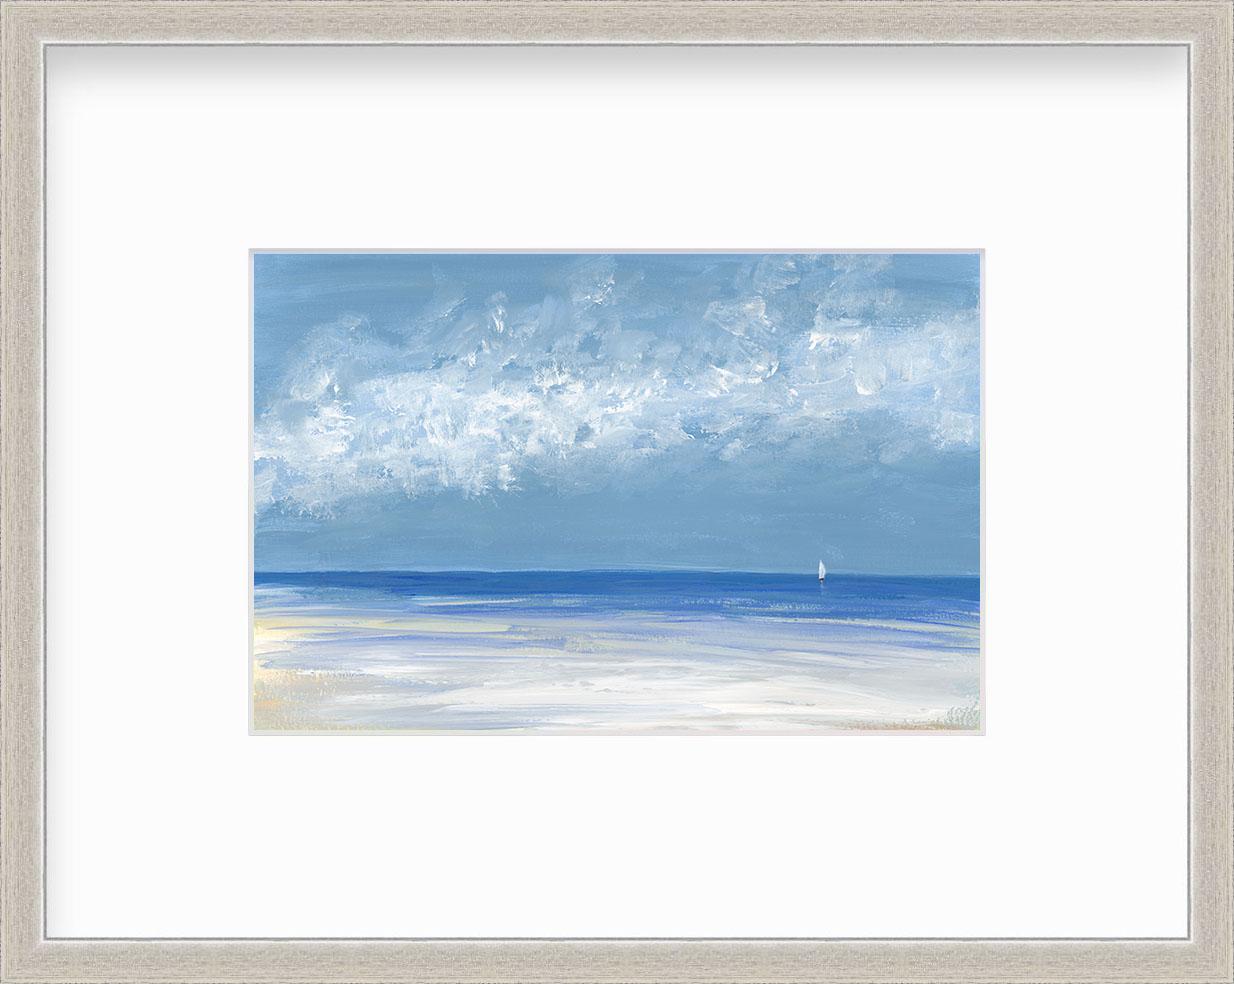 S. Cora Aldo Landscape Print - "Clear Day, " Framed Limited Edition Giclee Print, 12" x 18"